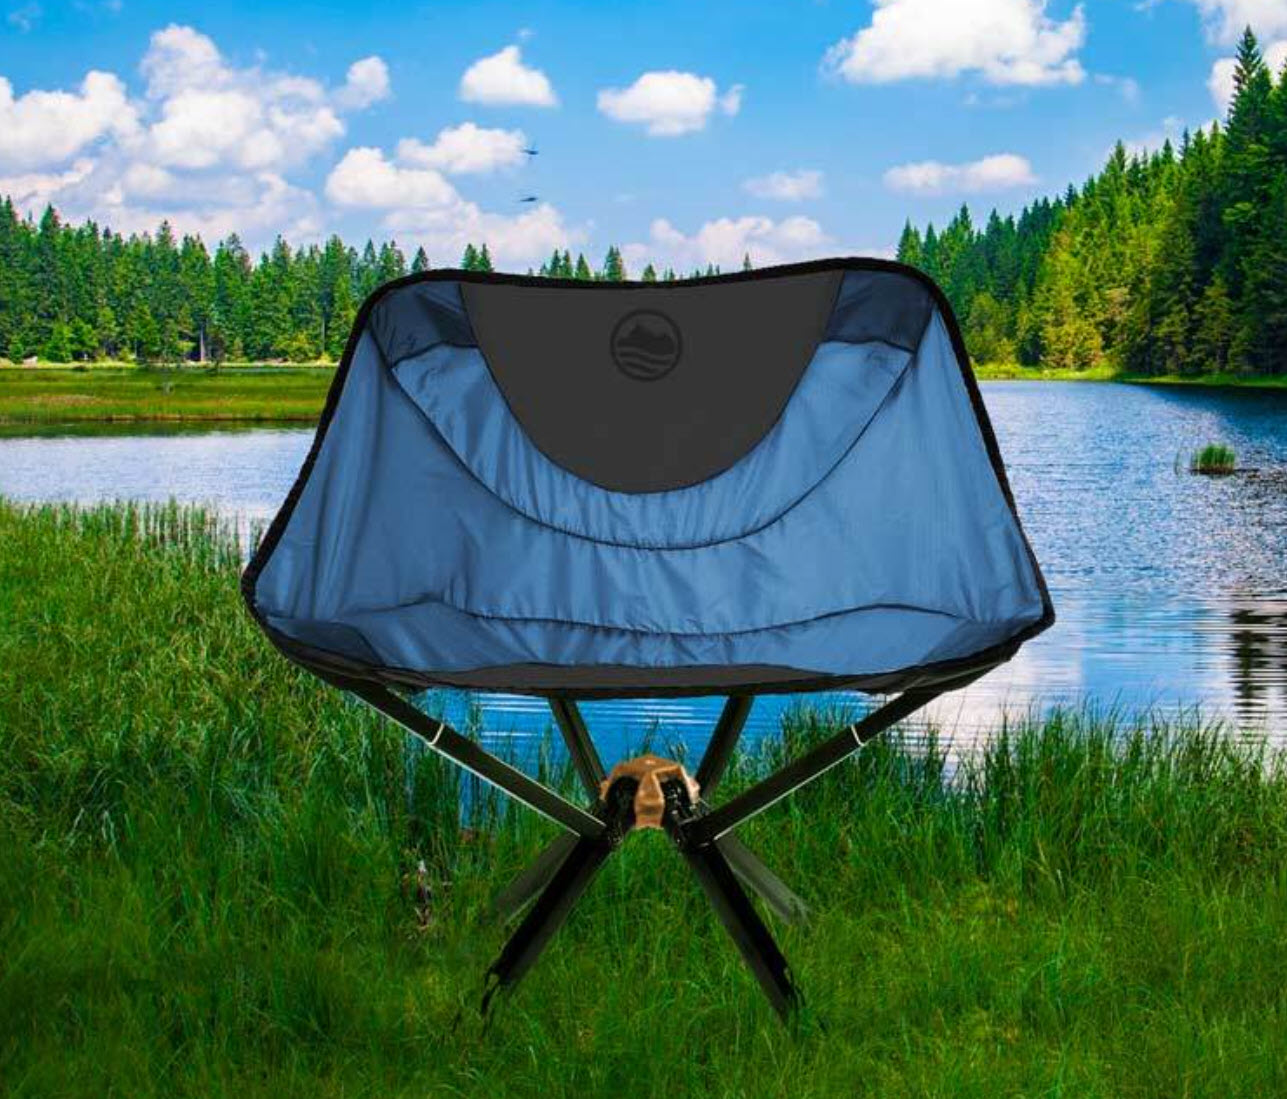 Cliq Chair Review Tailgating Challenge